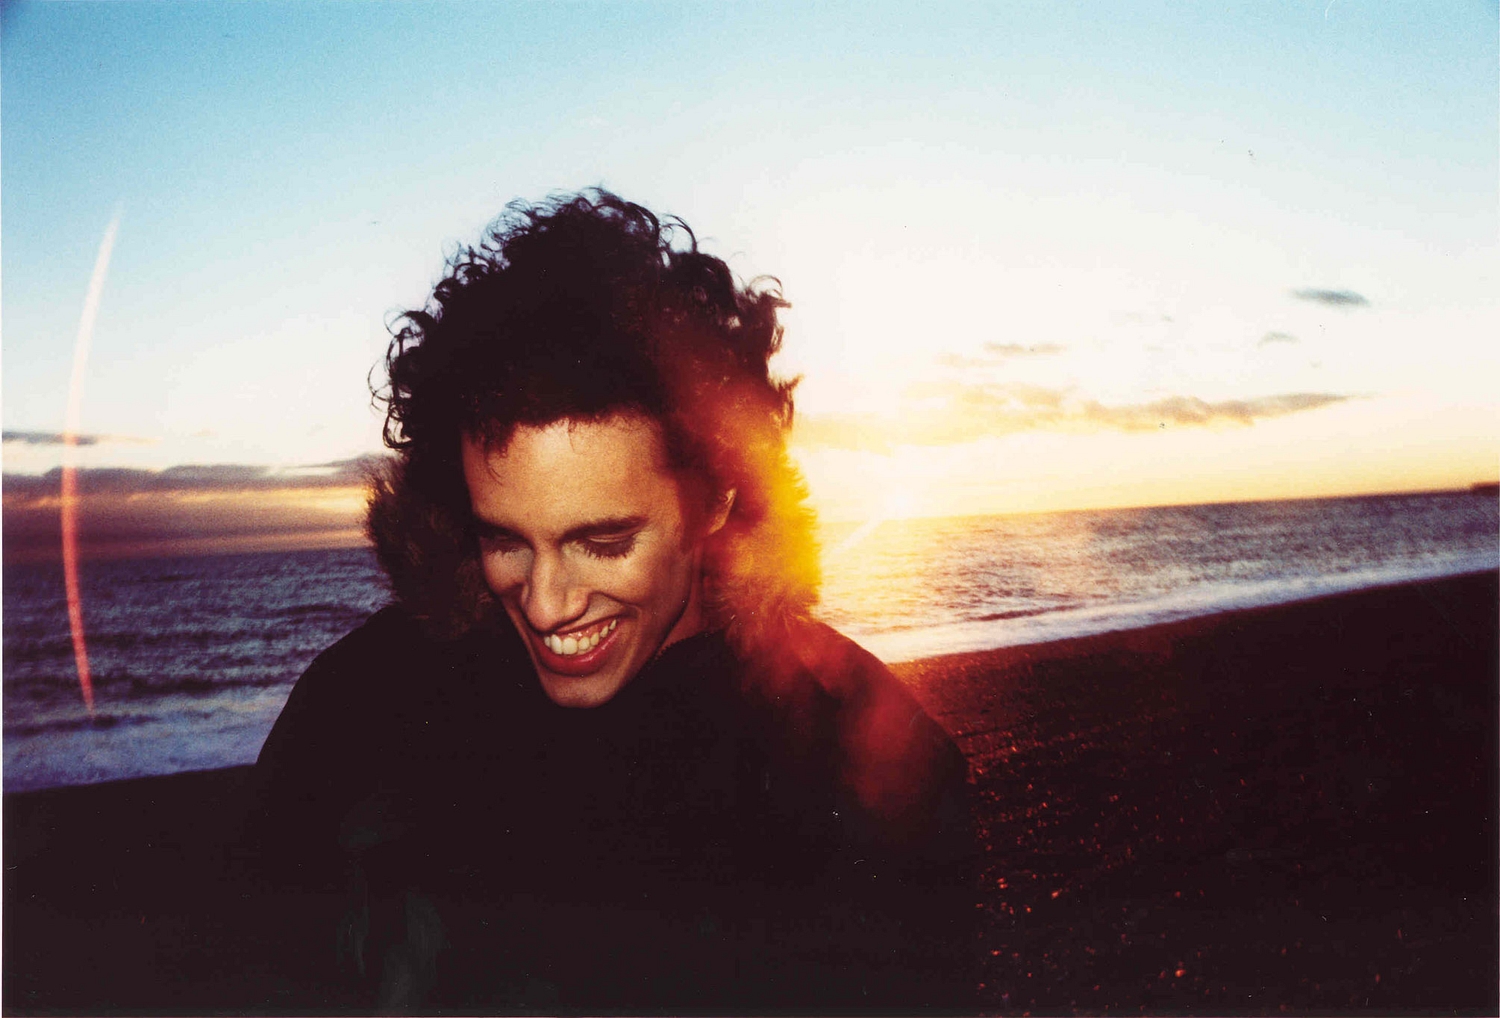 Beautiful rewind: A comprehensive guide to Four Tet